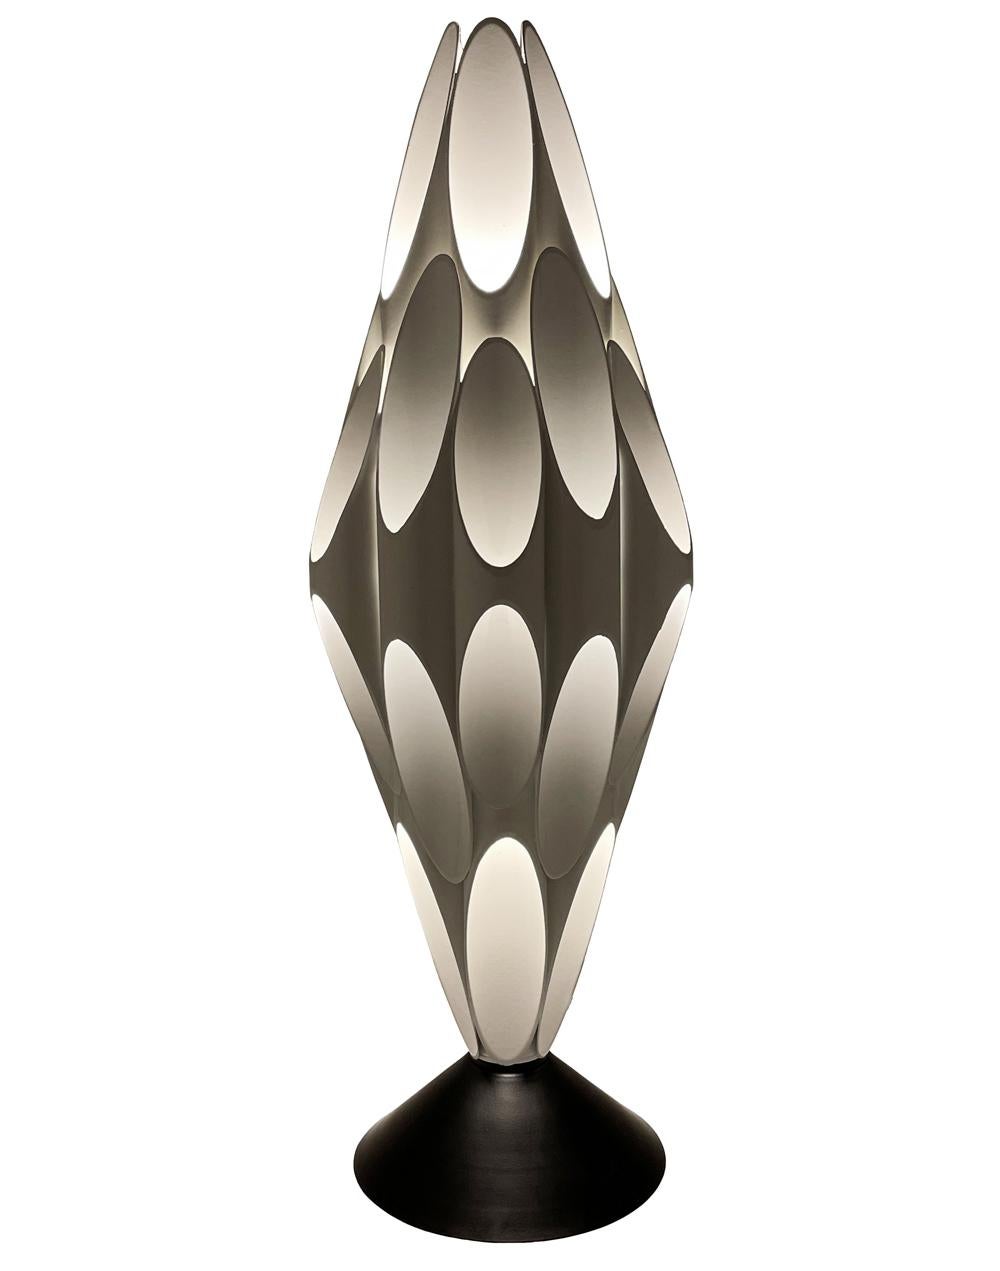 Contemporary Mid-Century Modern Tubular Table Sculpture Lamp in Black & White After Rougier For Sale